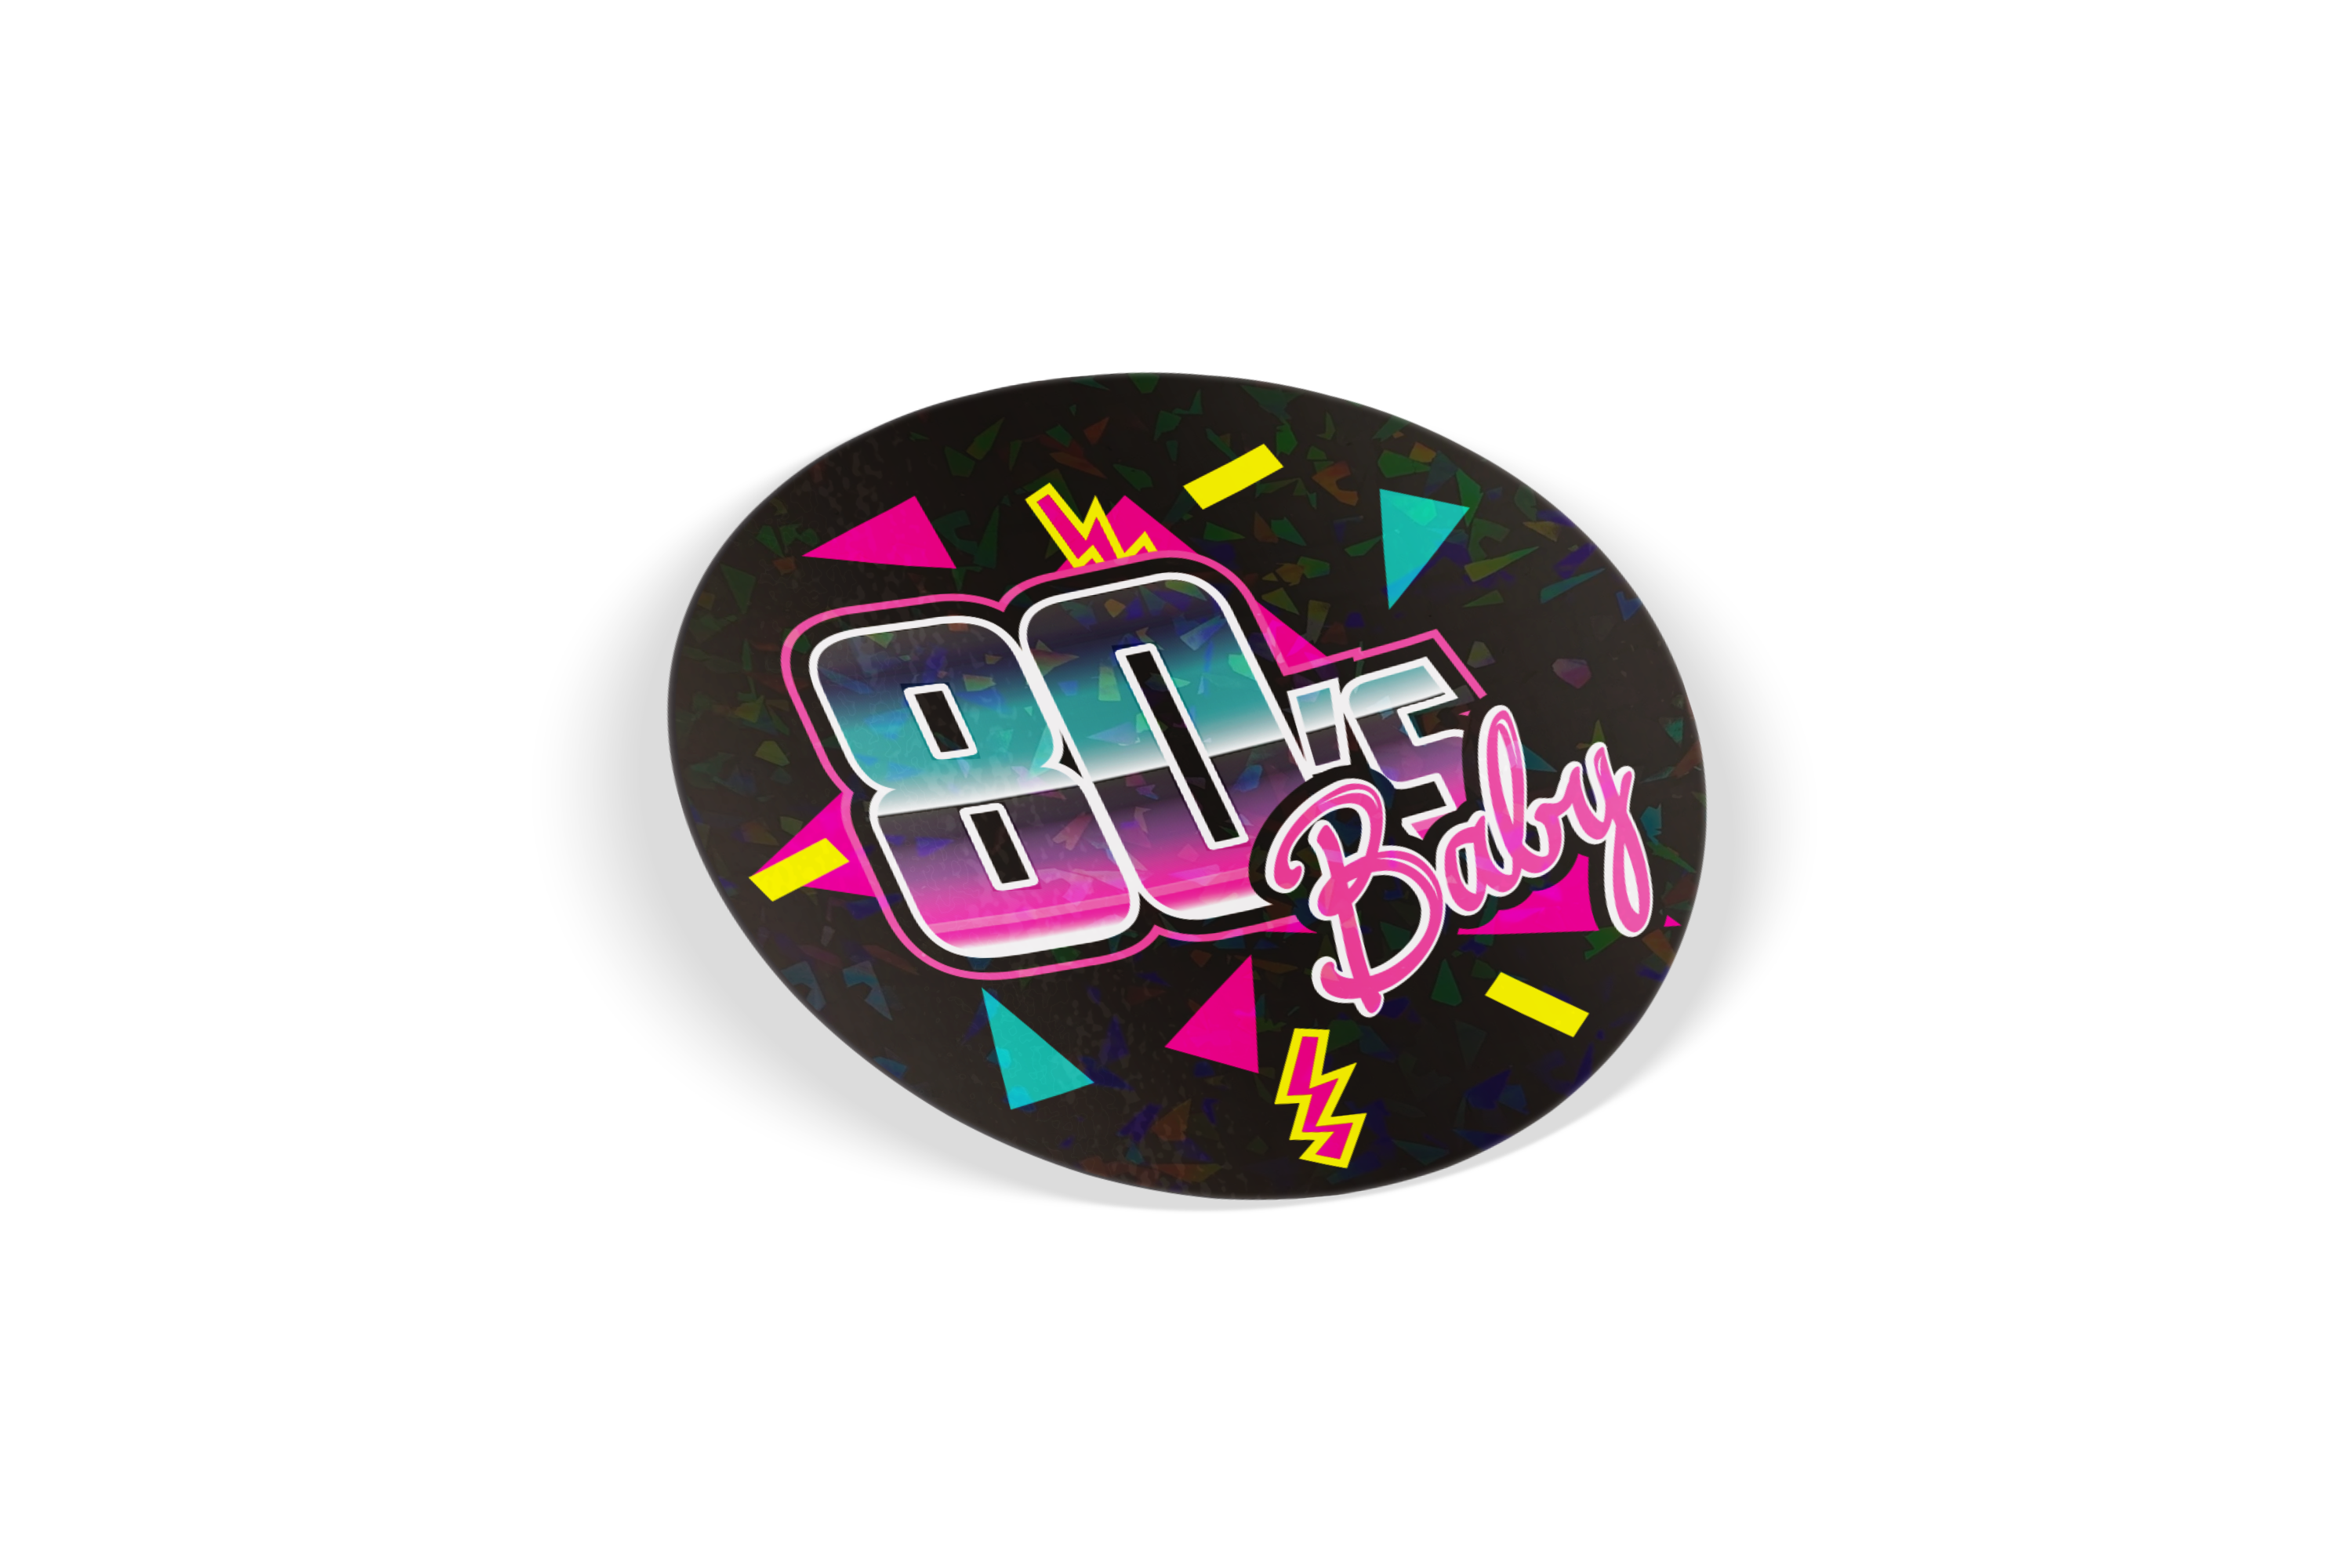 80s baby - circle sticker flake holo  Drift bunny decals